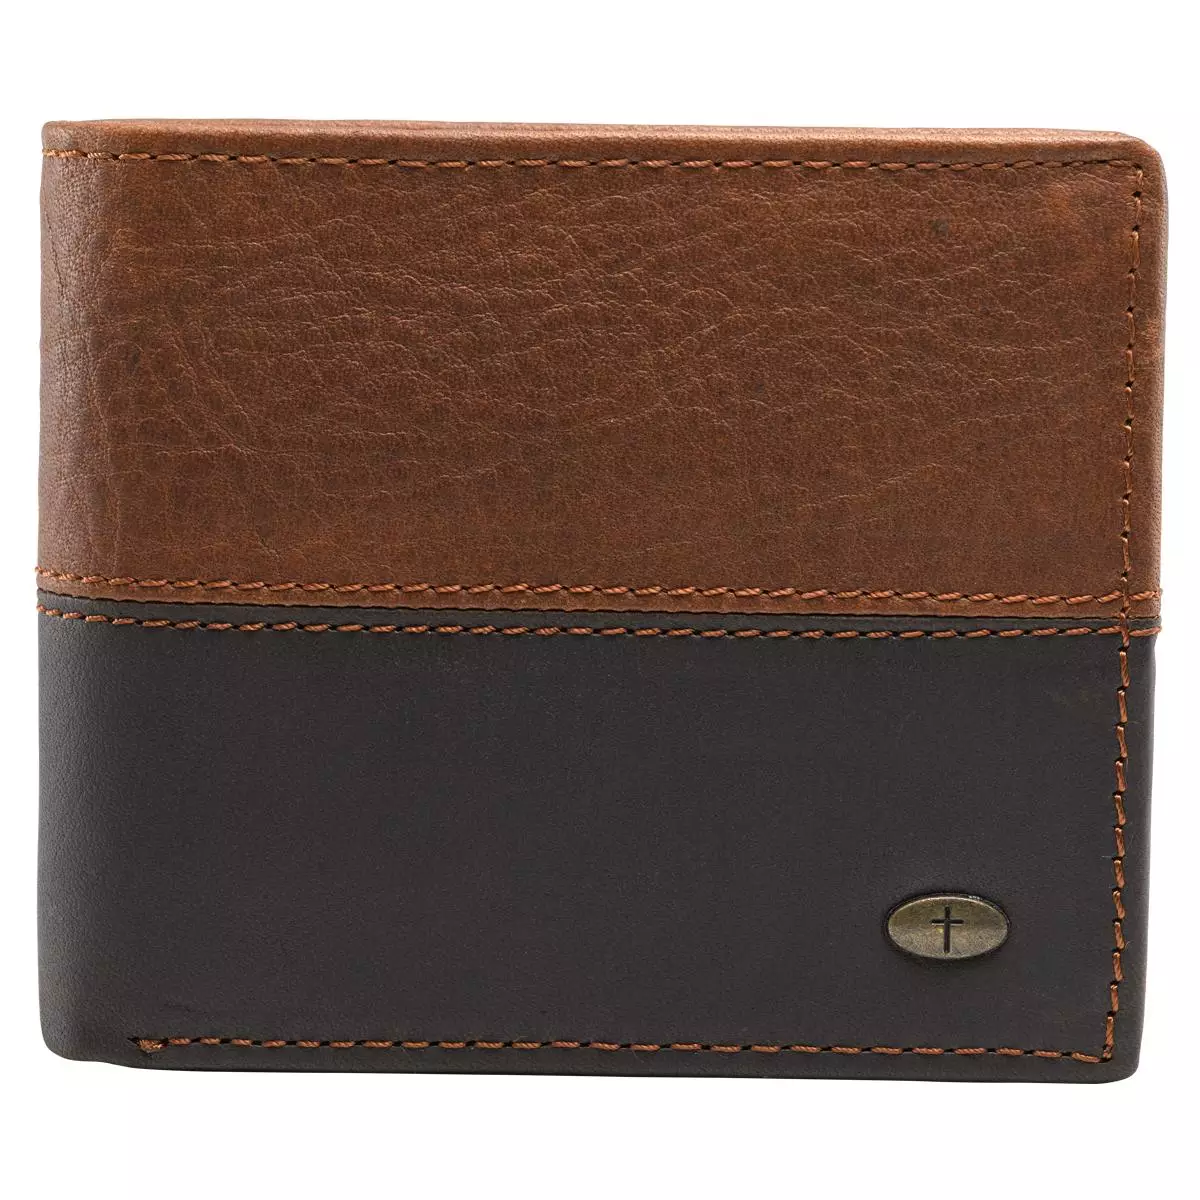 Two-Tone Genuine Leather Wallet with Cross Stud